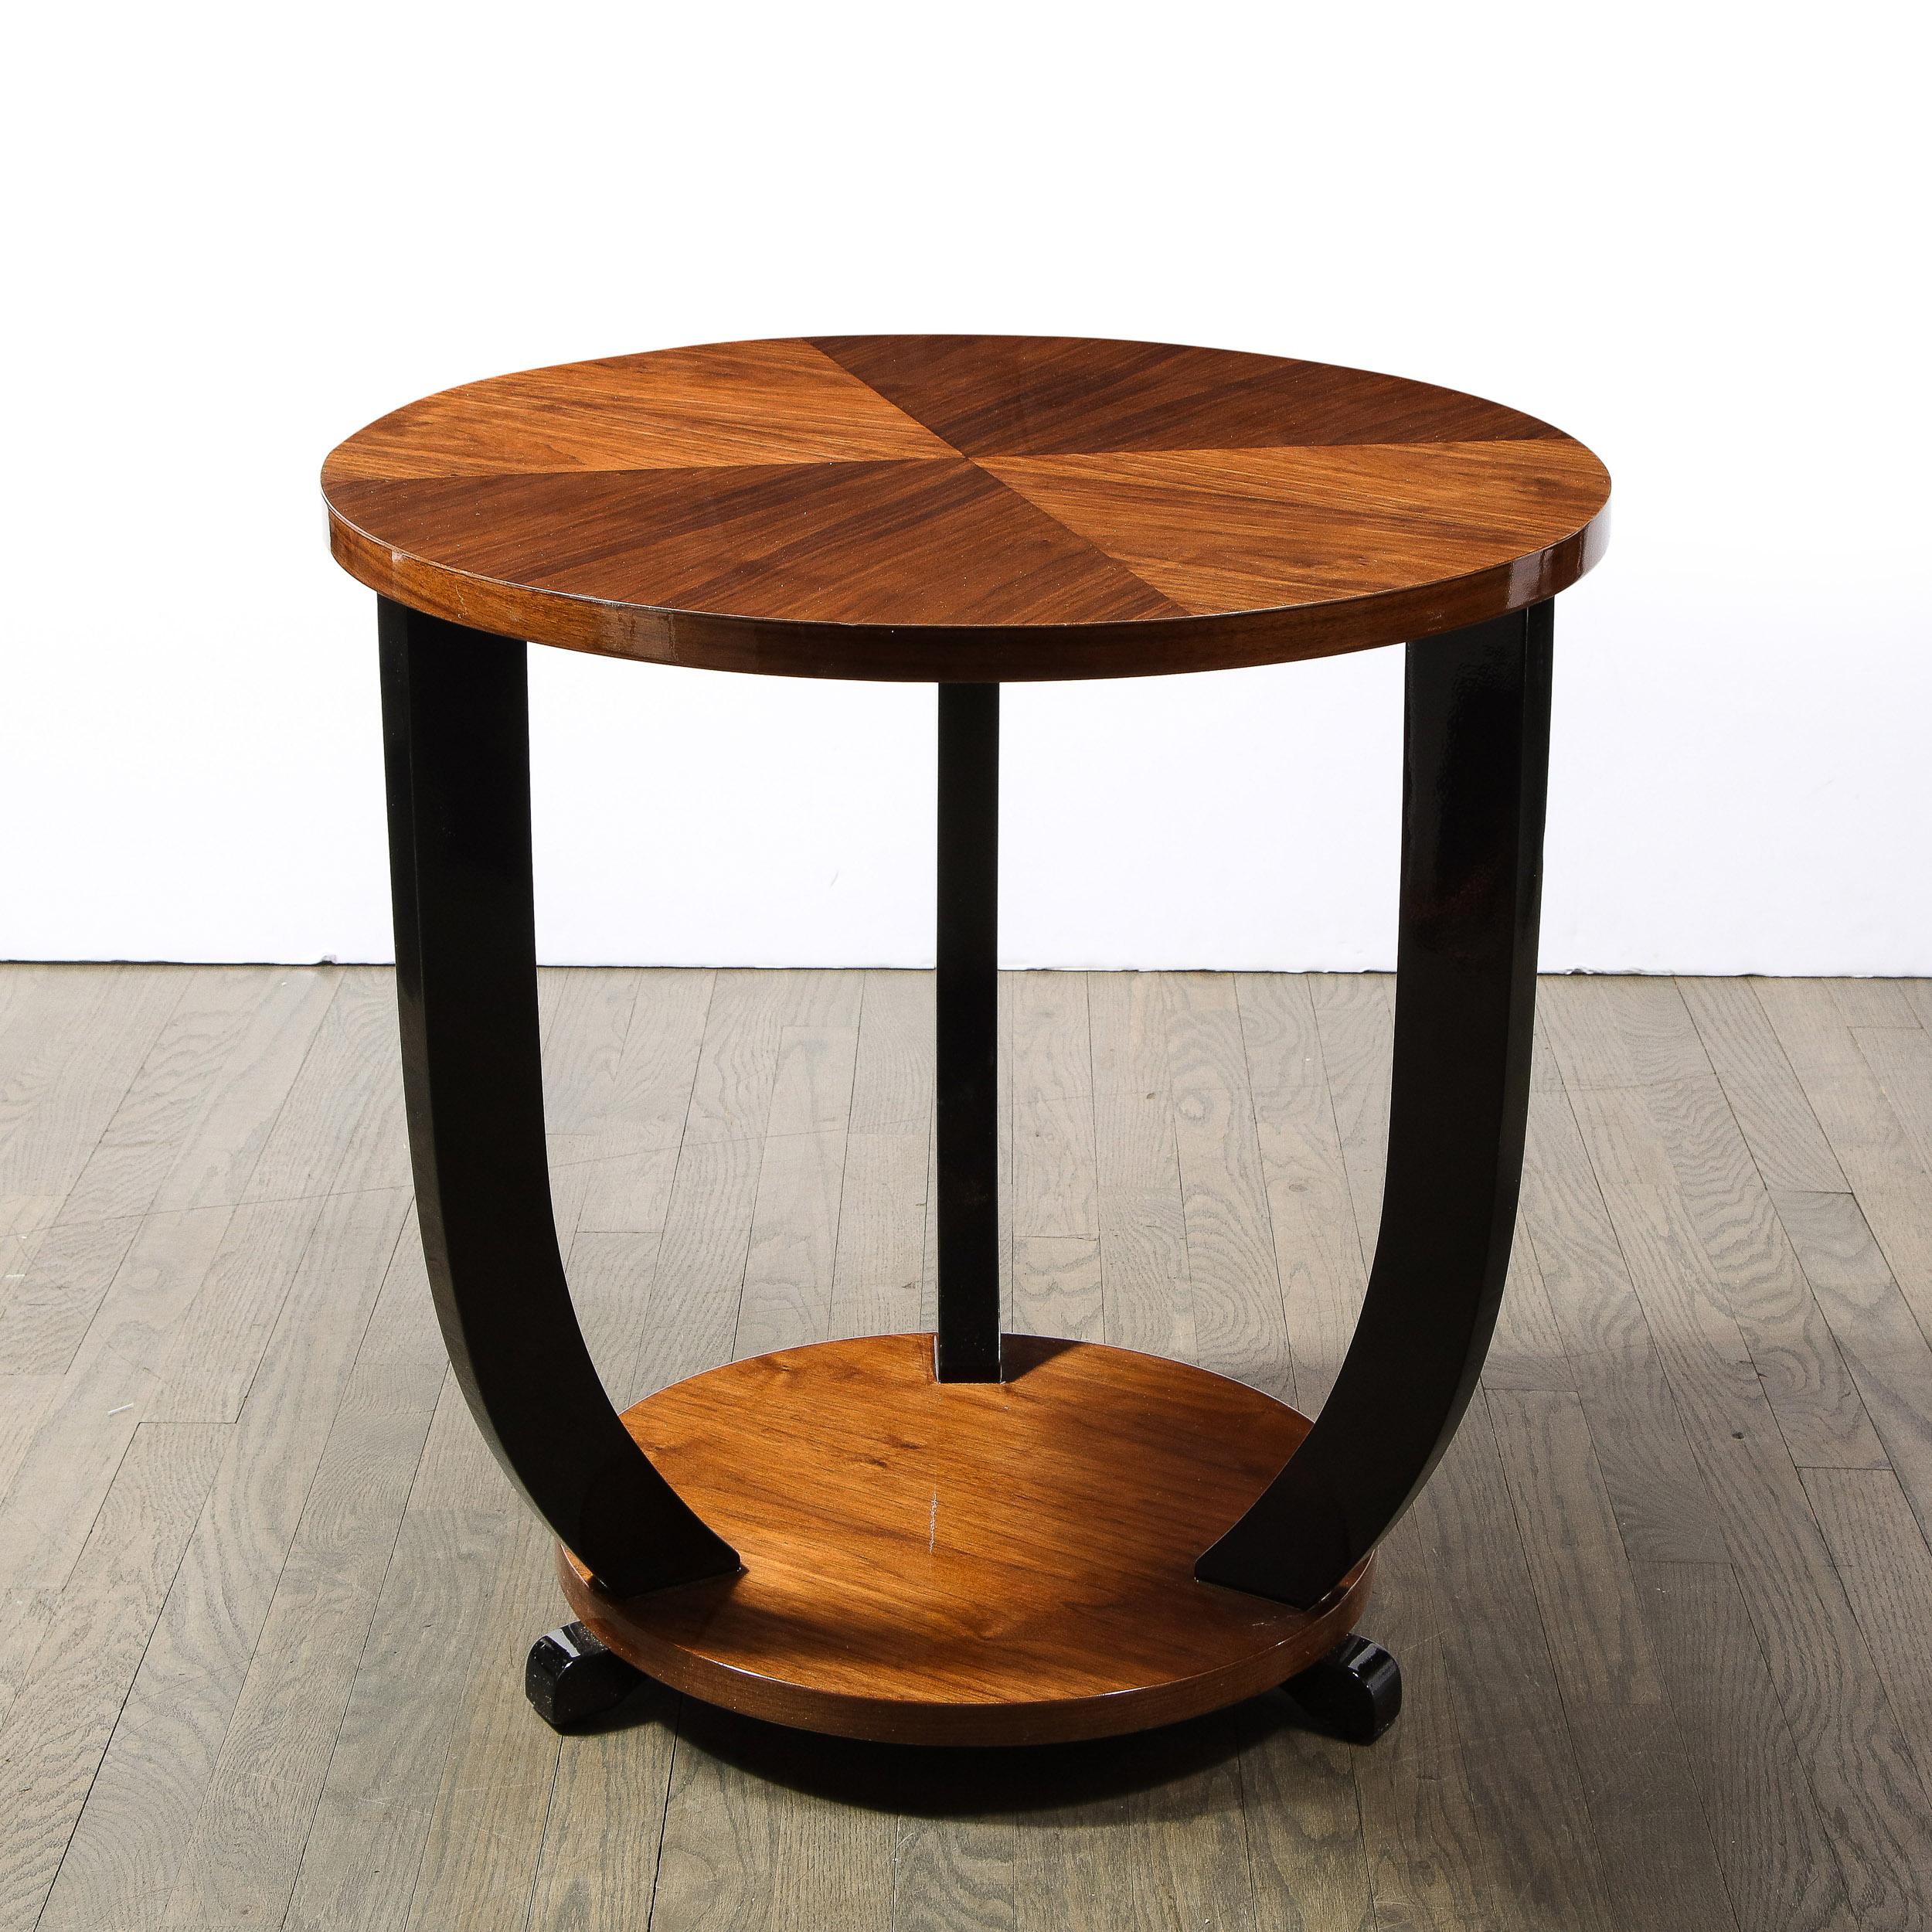 Mid-20th Century French Art Deco Two-Tiered Bookmatched Walnut & Black Lacquer Gueridon Table For Sale